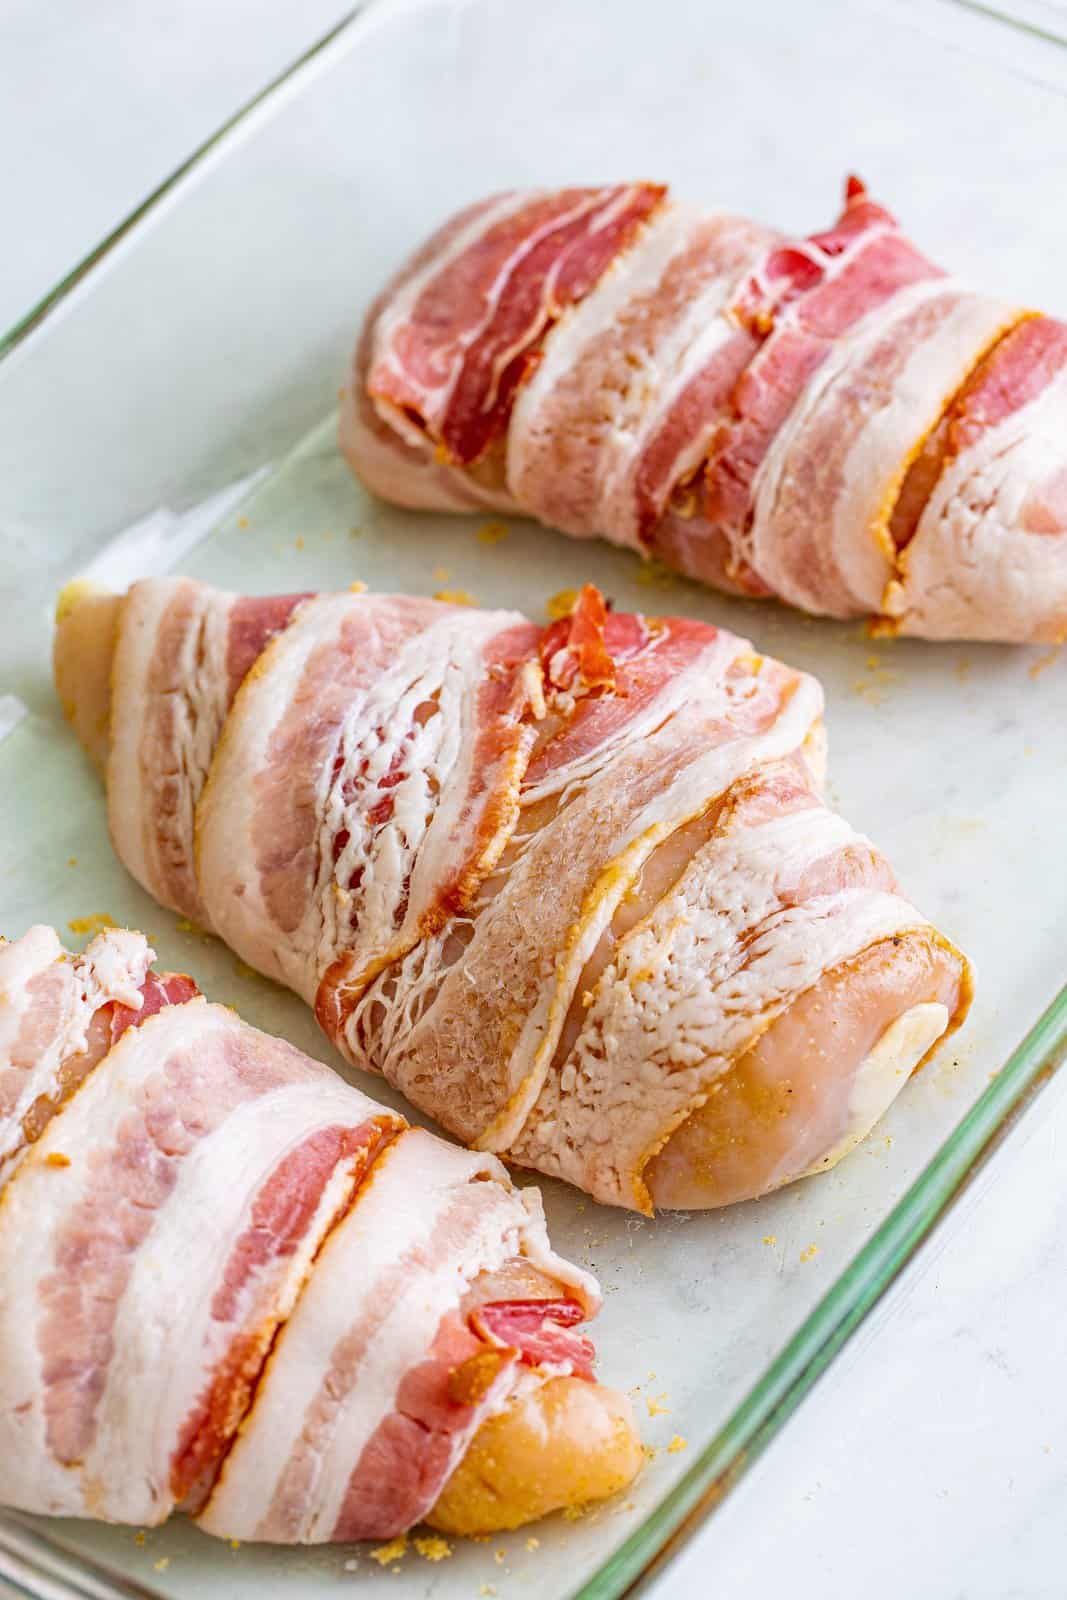 Chicken wrapped in bacon.